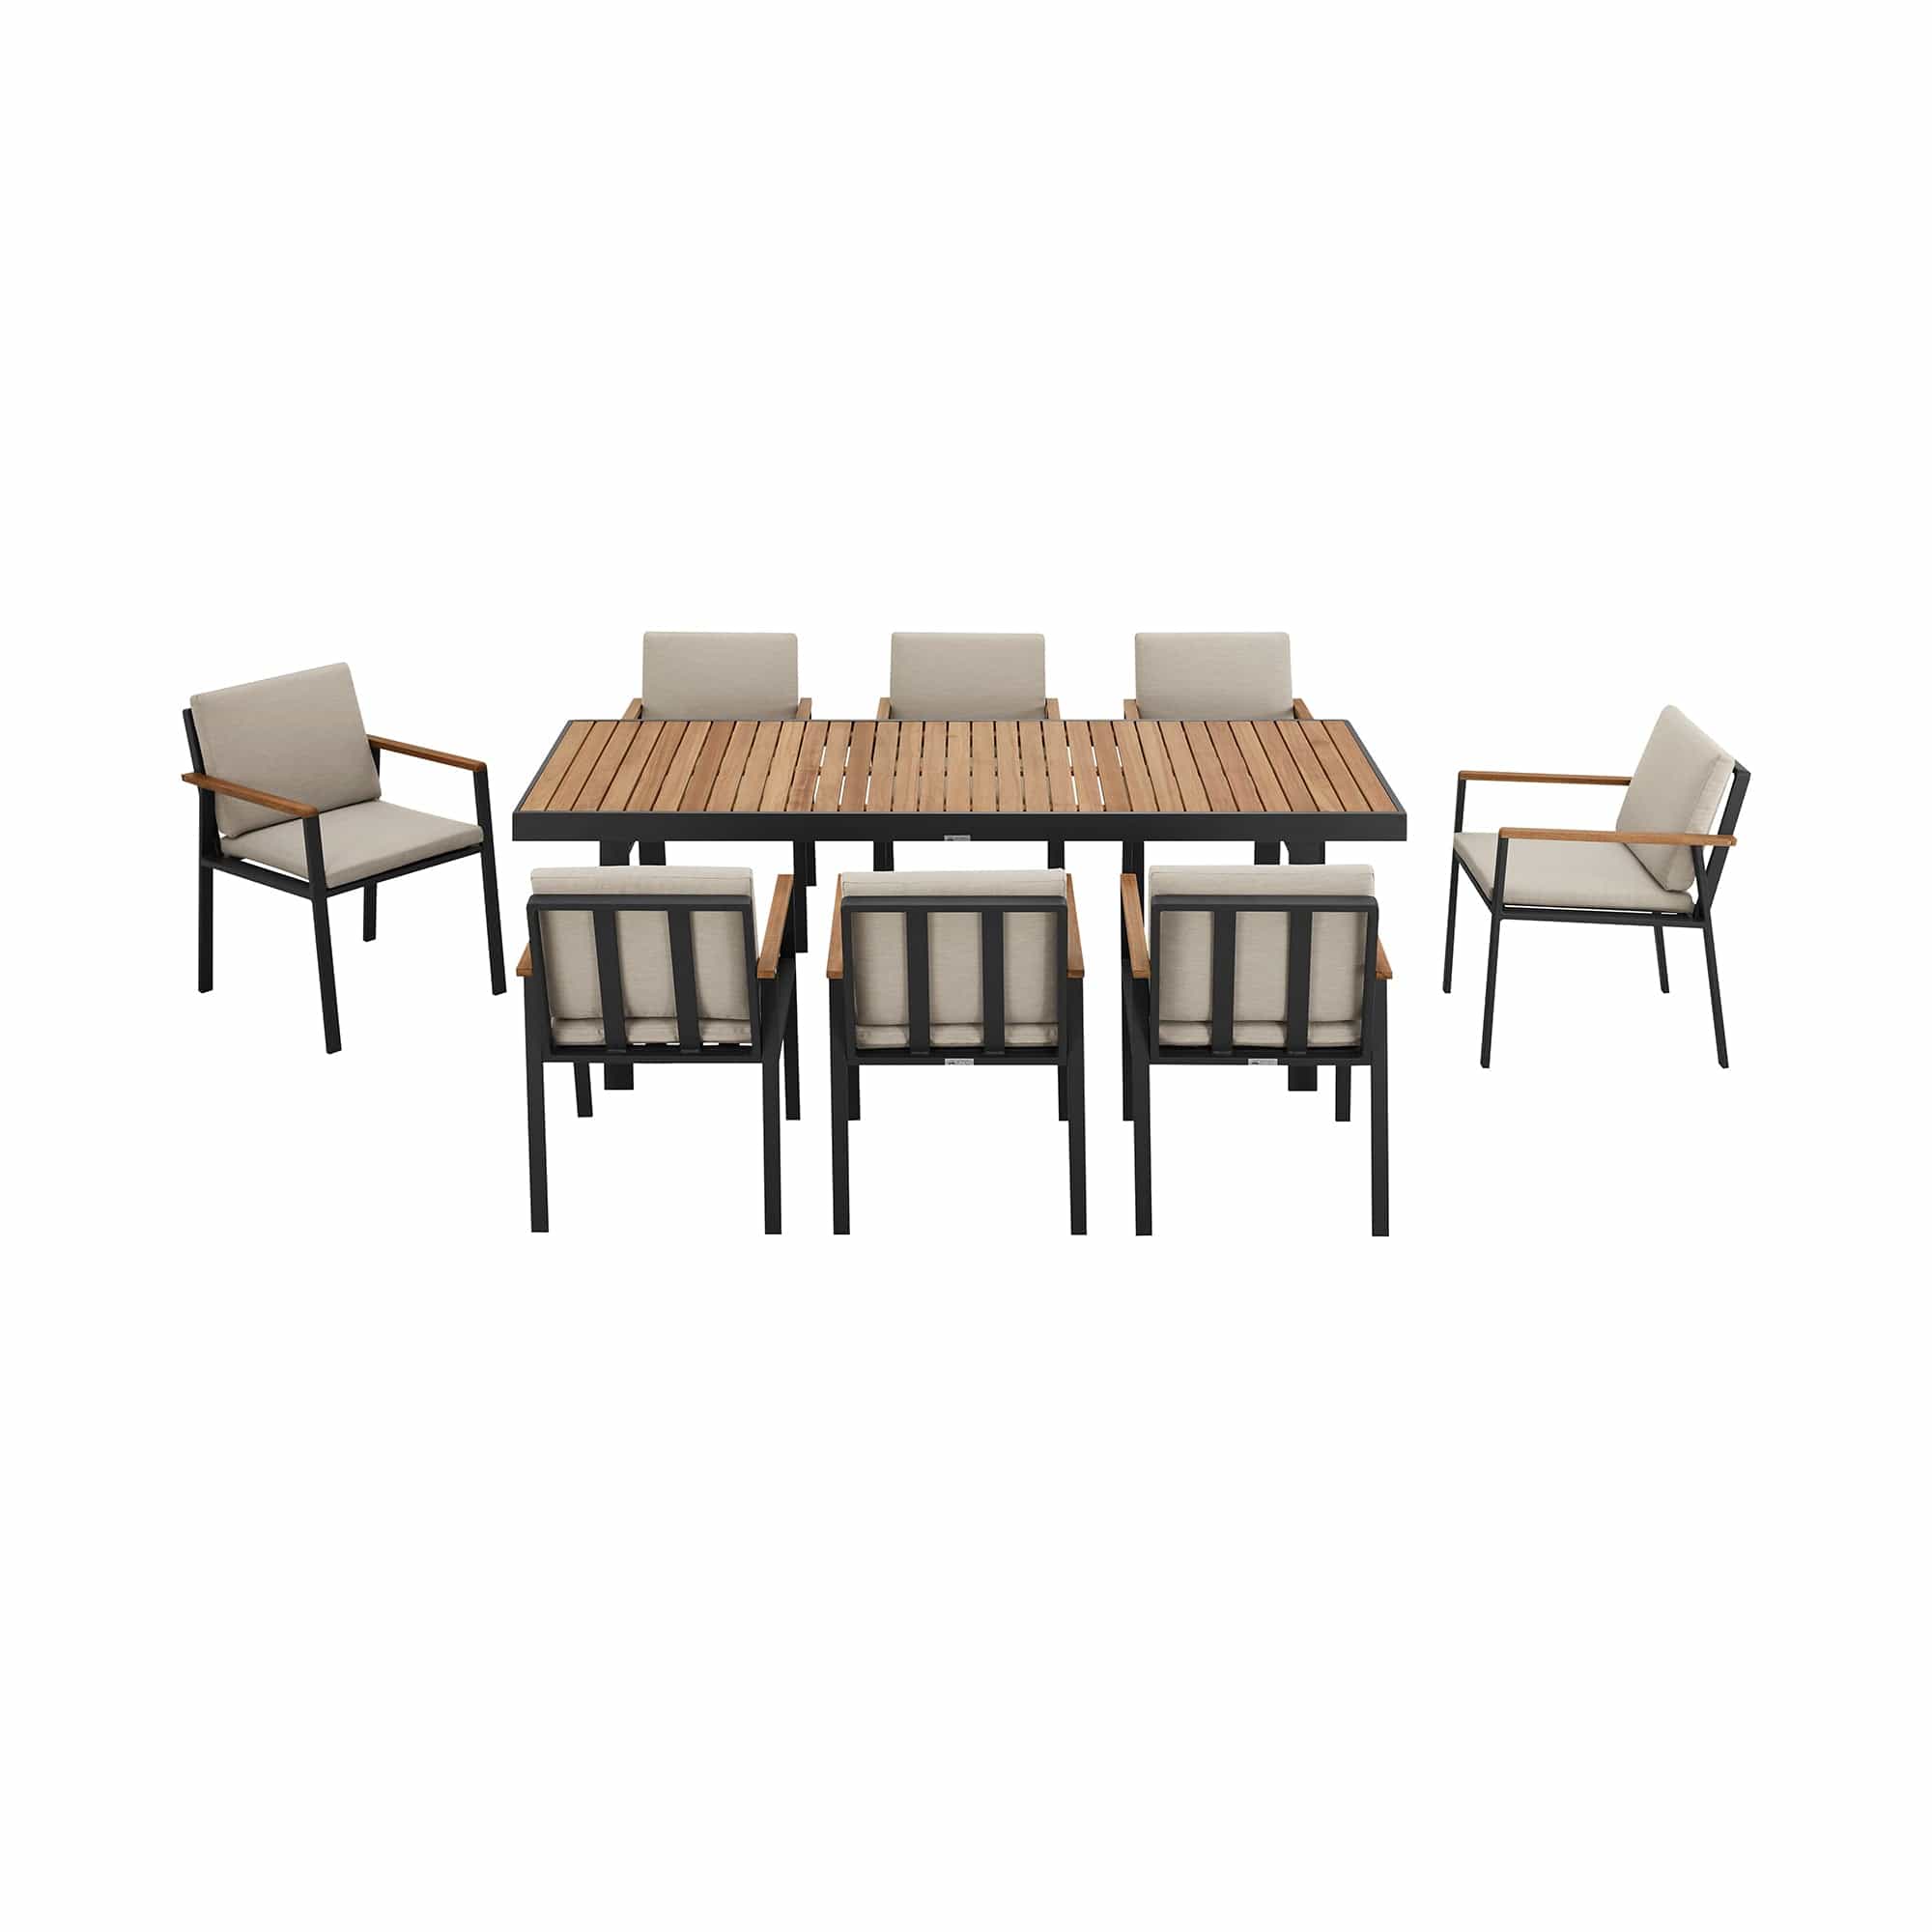 Armen Living Outdoor Dining Set Armen Living | Nofi Outdoor Patio 9 Piece Dining Set in Charcoal Finish with Taupe Cushions | SETODNODIBE